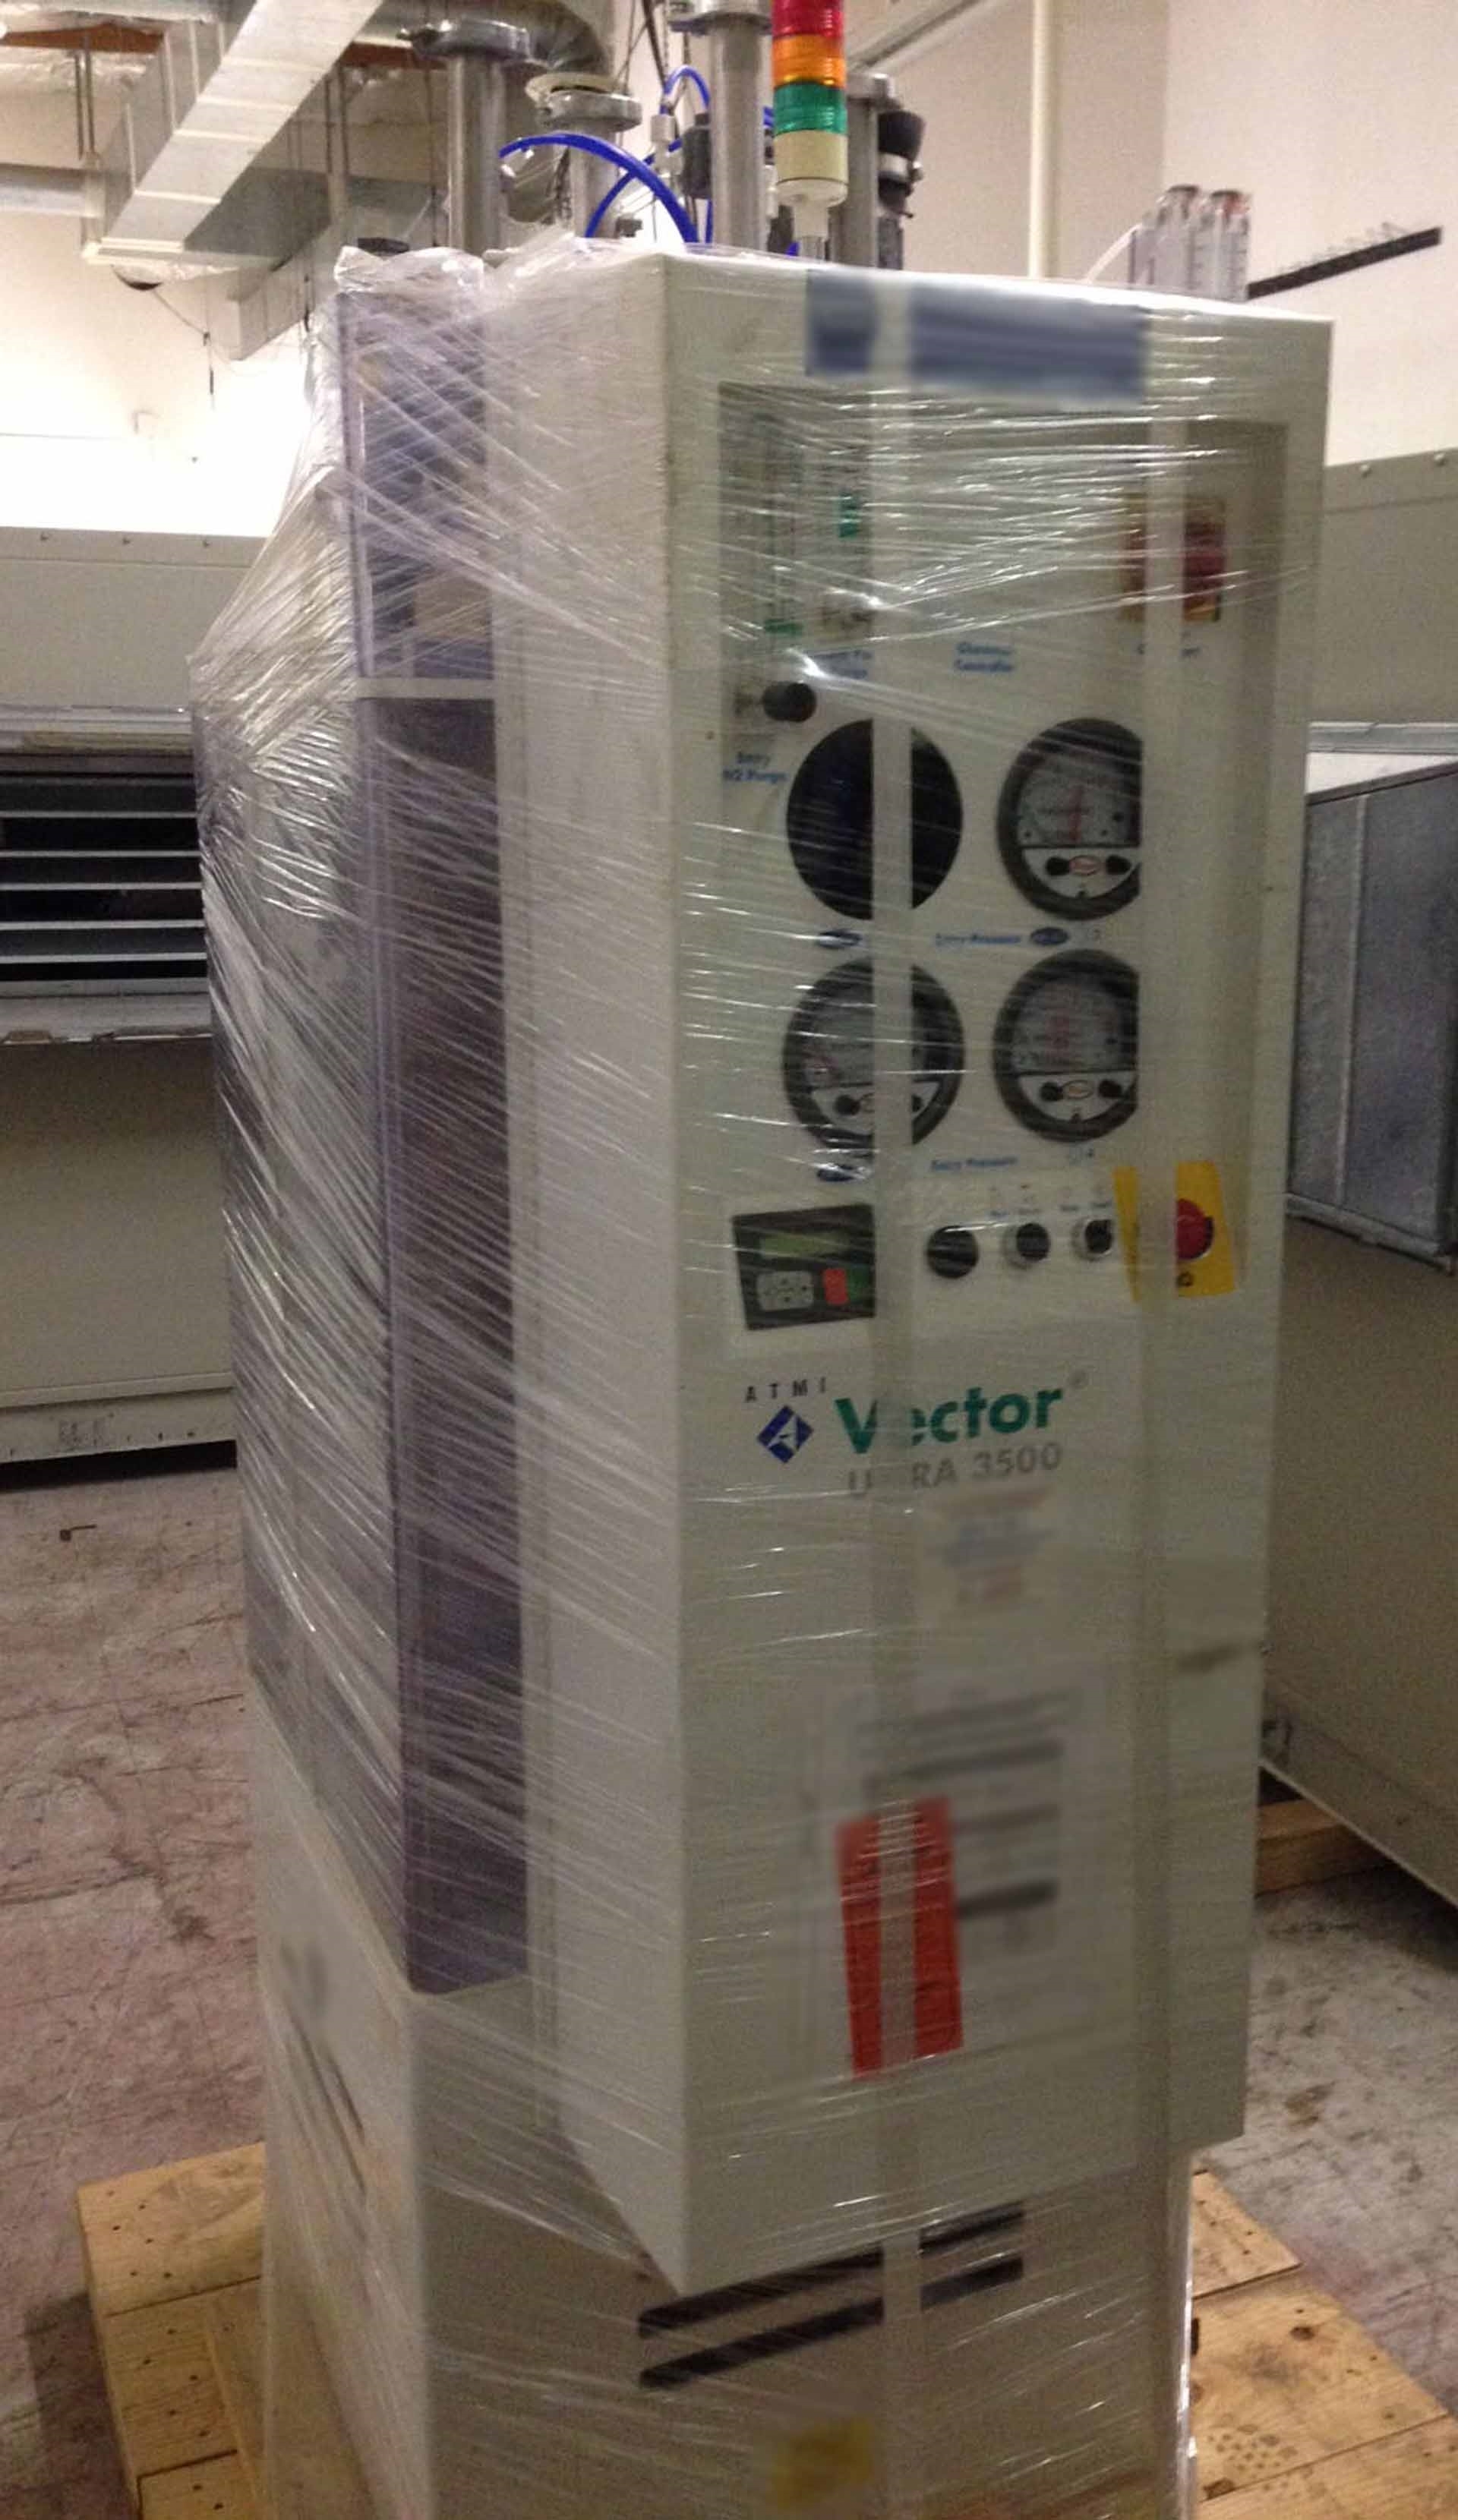 Photo Used ATMI / ECOSYS Vector Ultra 3500 For Sale